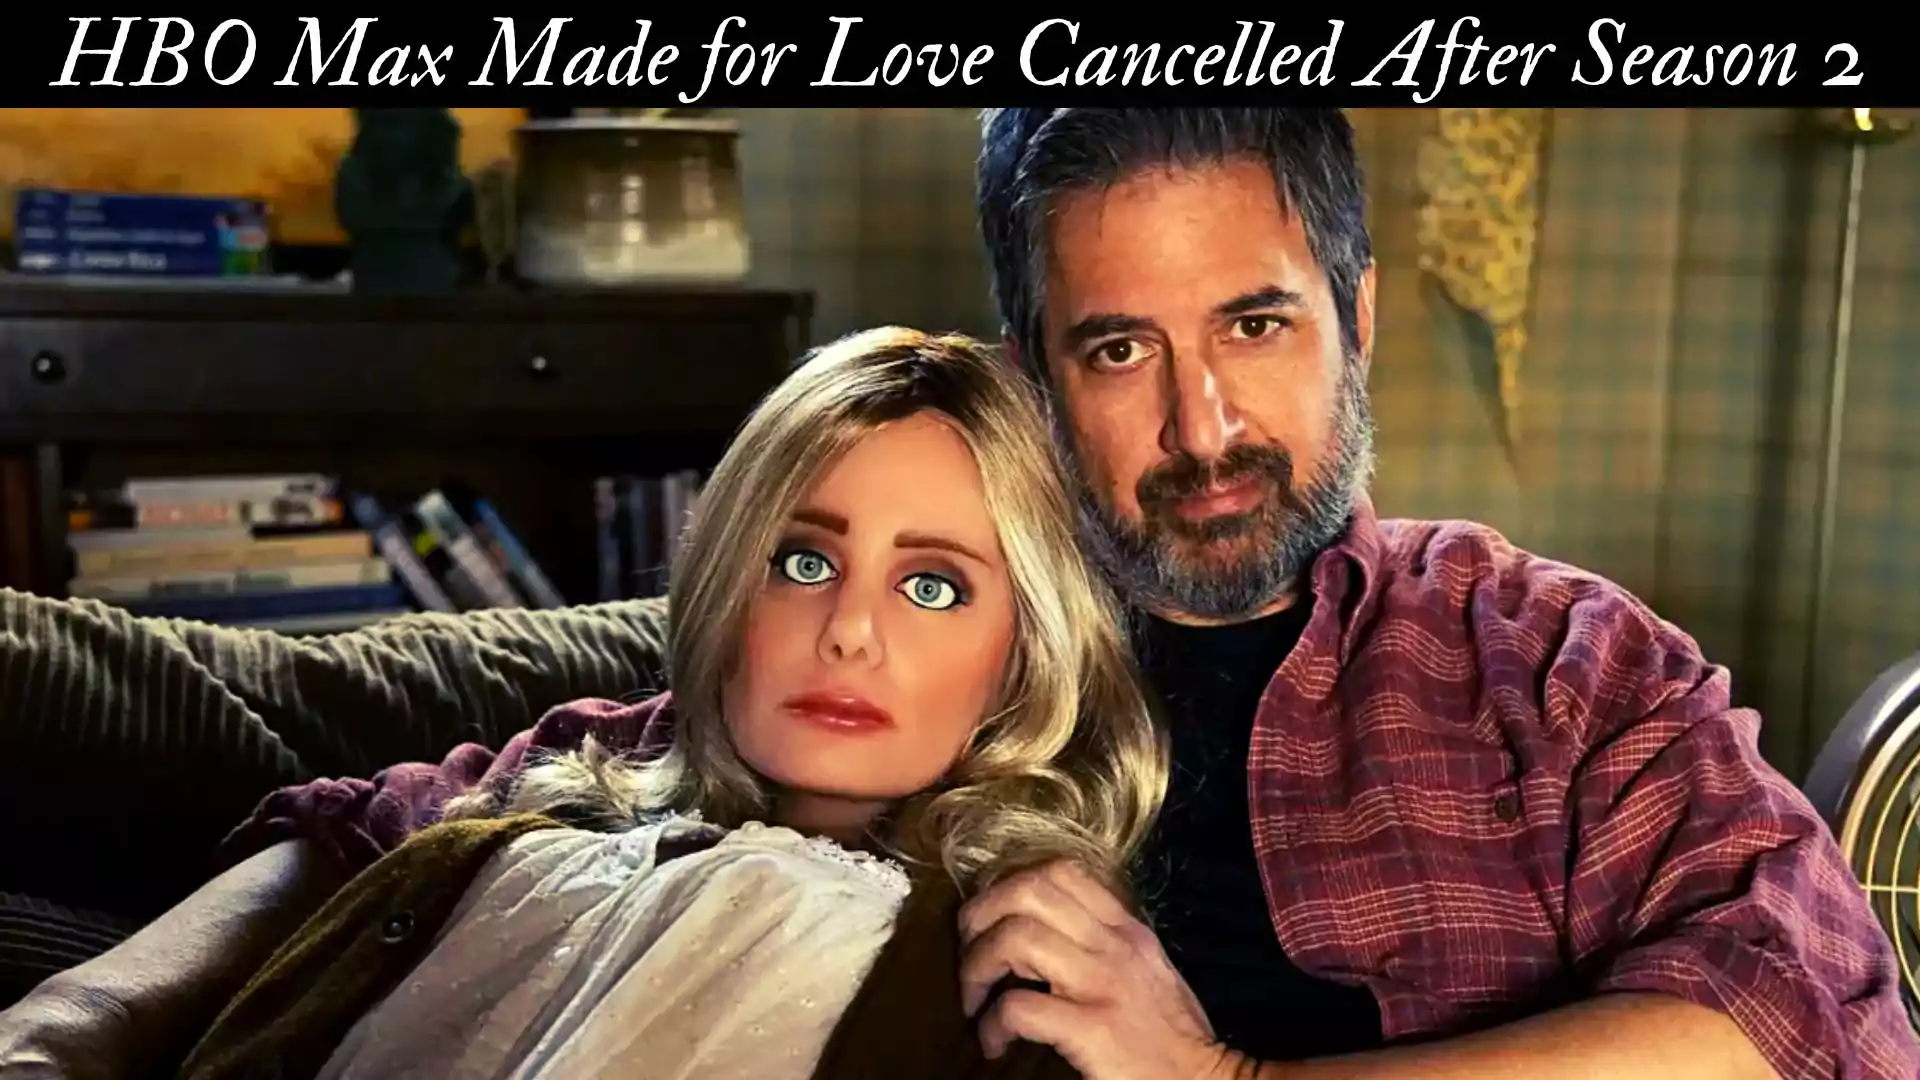 HBO Max Made for Love Cancelled After Season 2